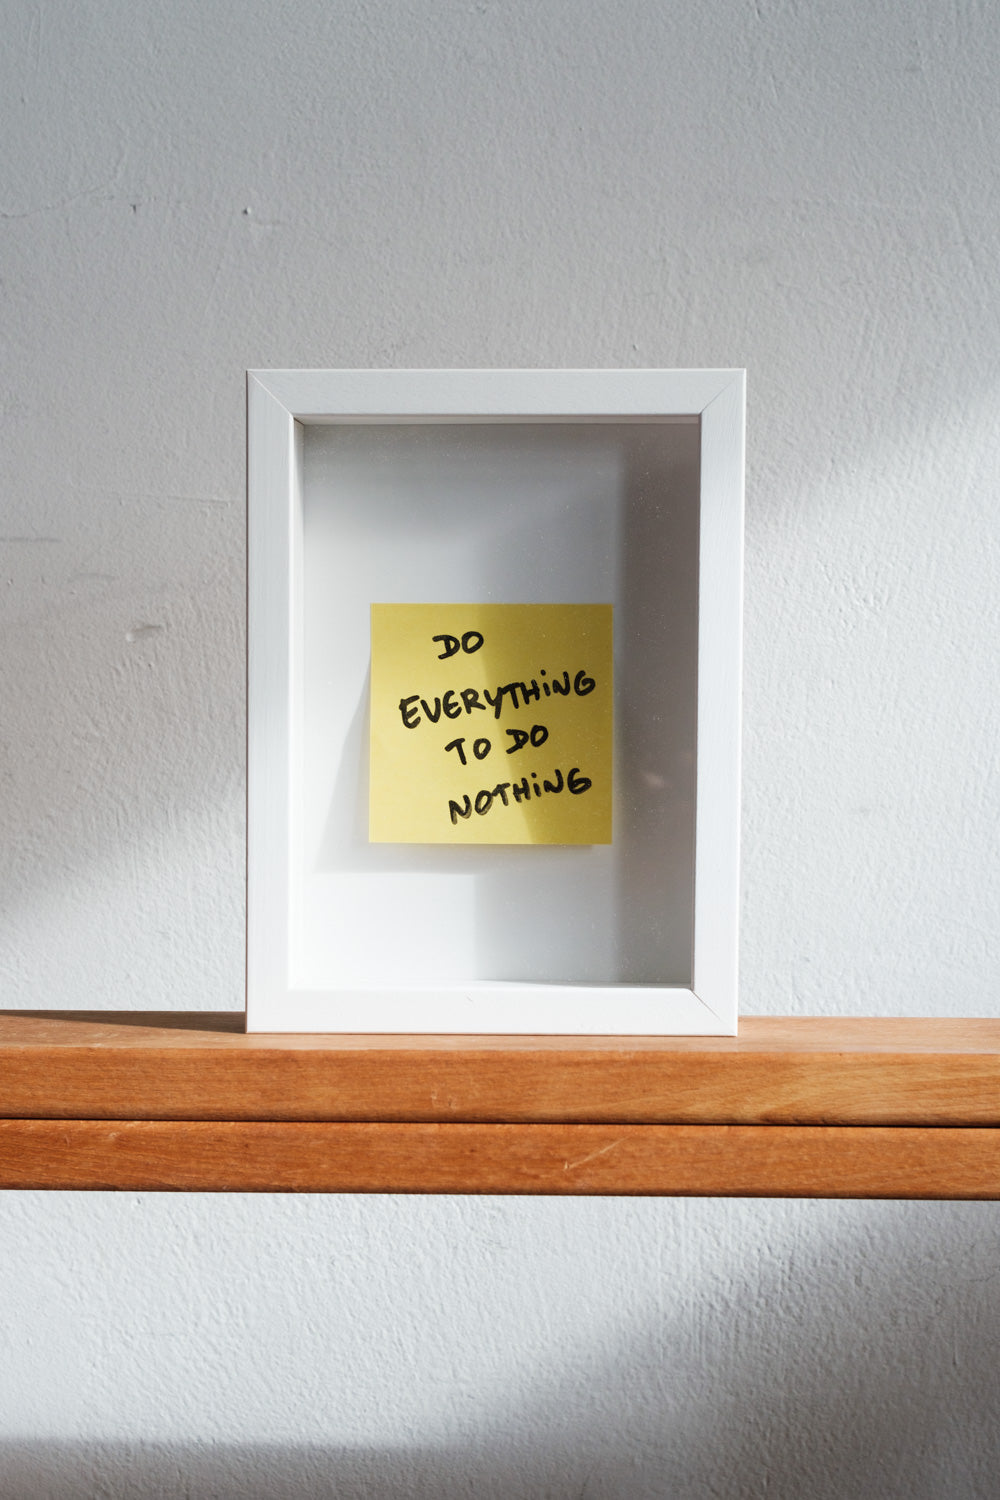 Art: Silkprint on Post-it® : DO EVERYTHING TO DO NOTHING (YELLOW)